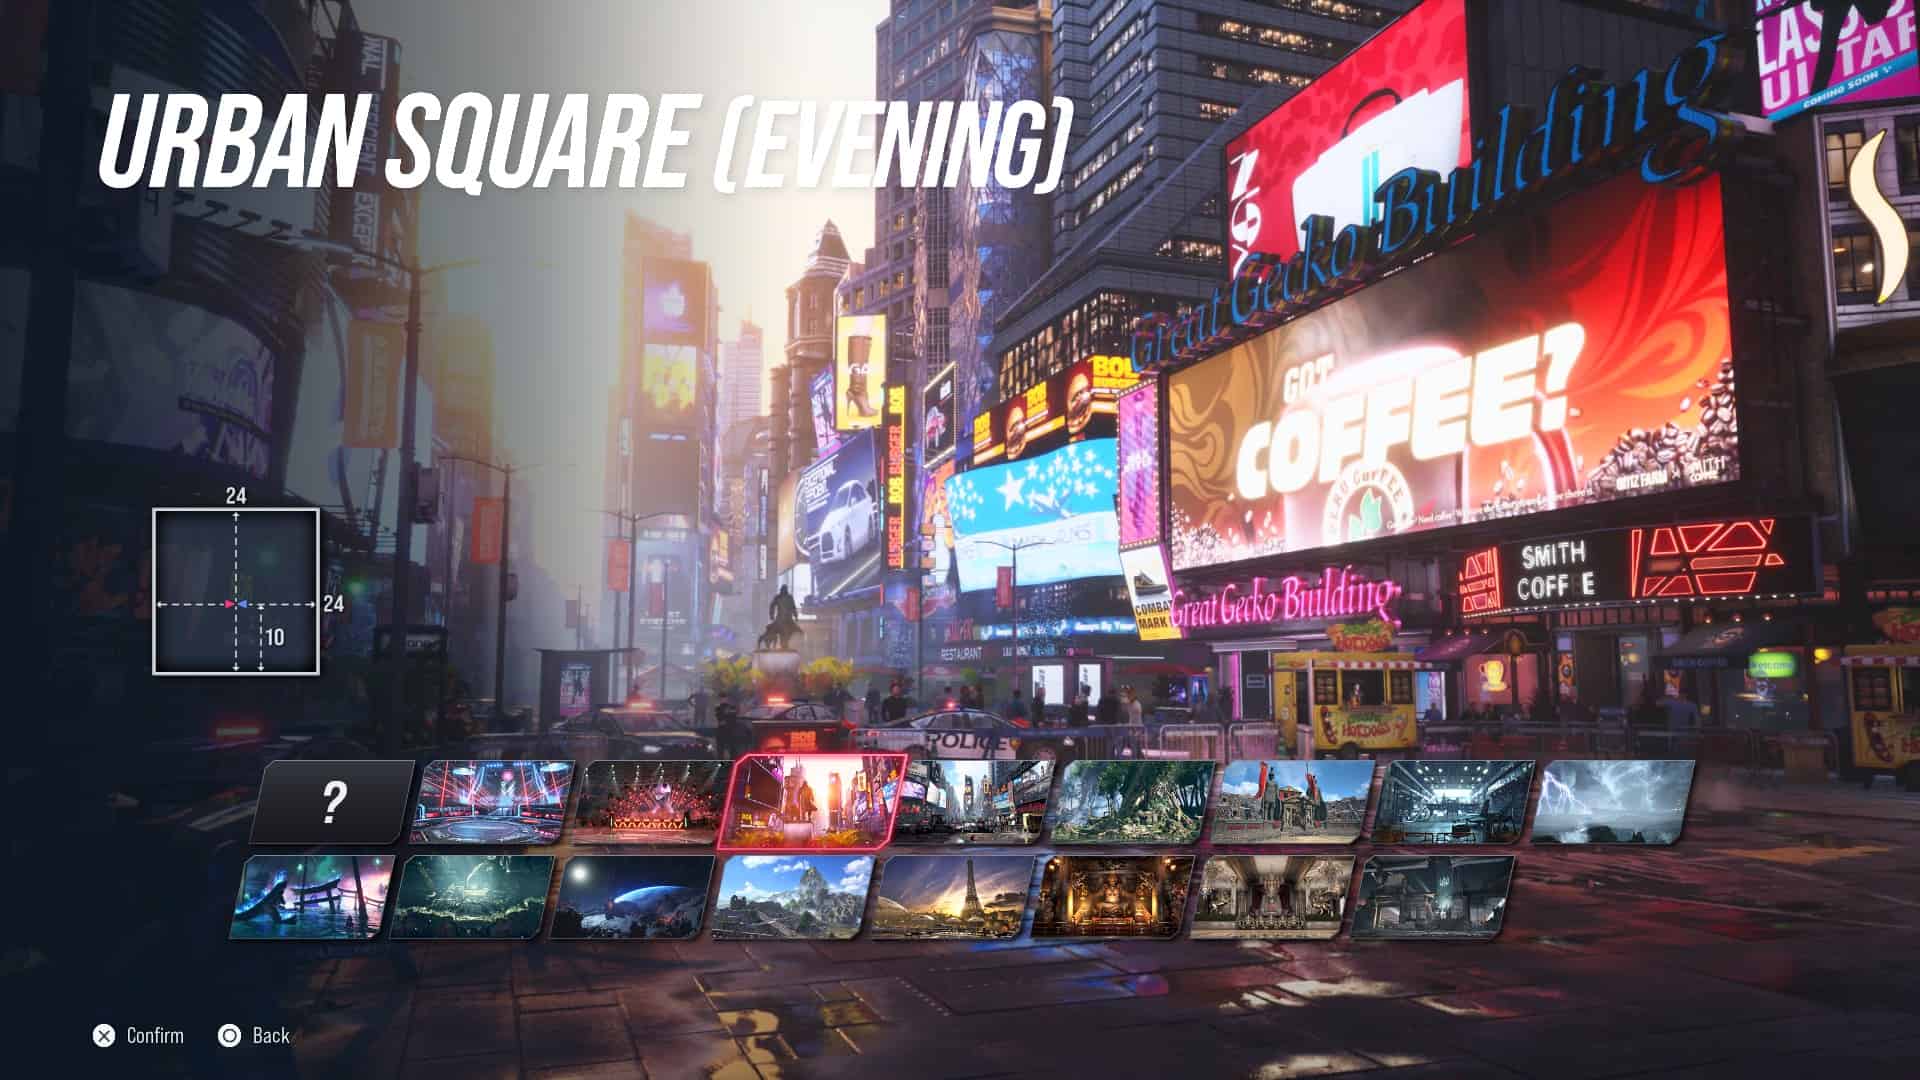 Tekken 8 stages: The Urban Square (Evening) stage in the stage select screen